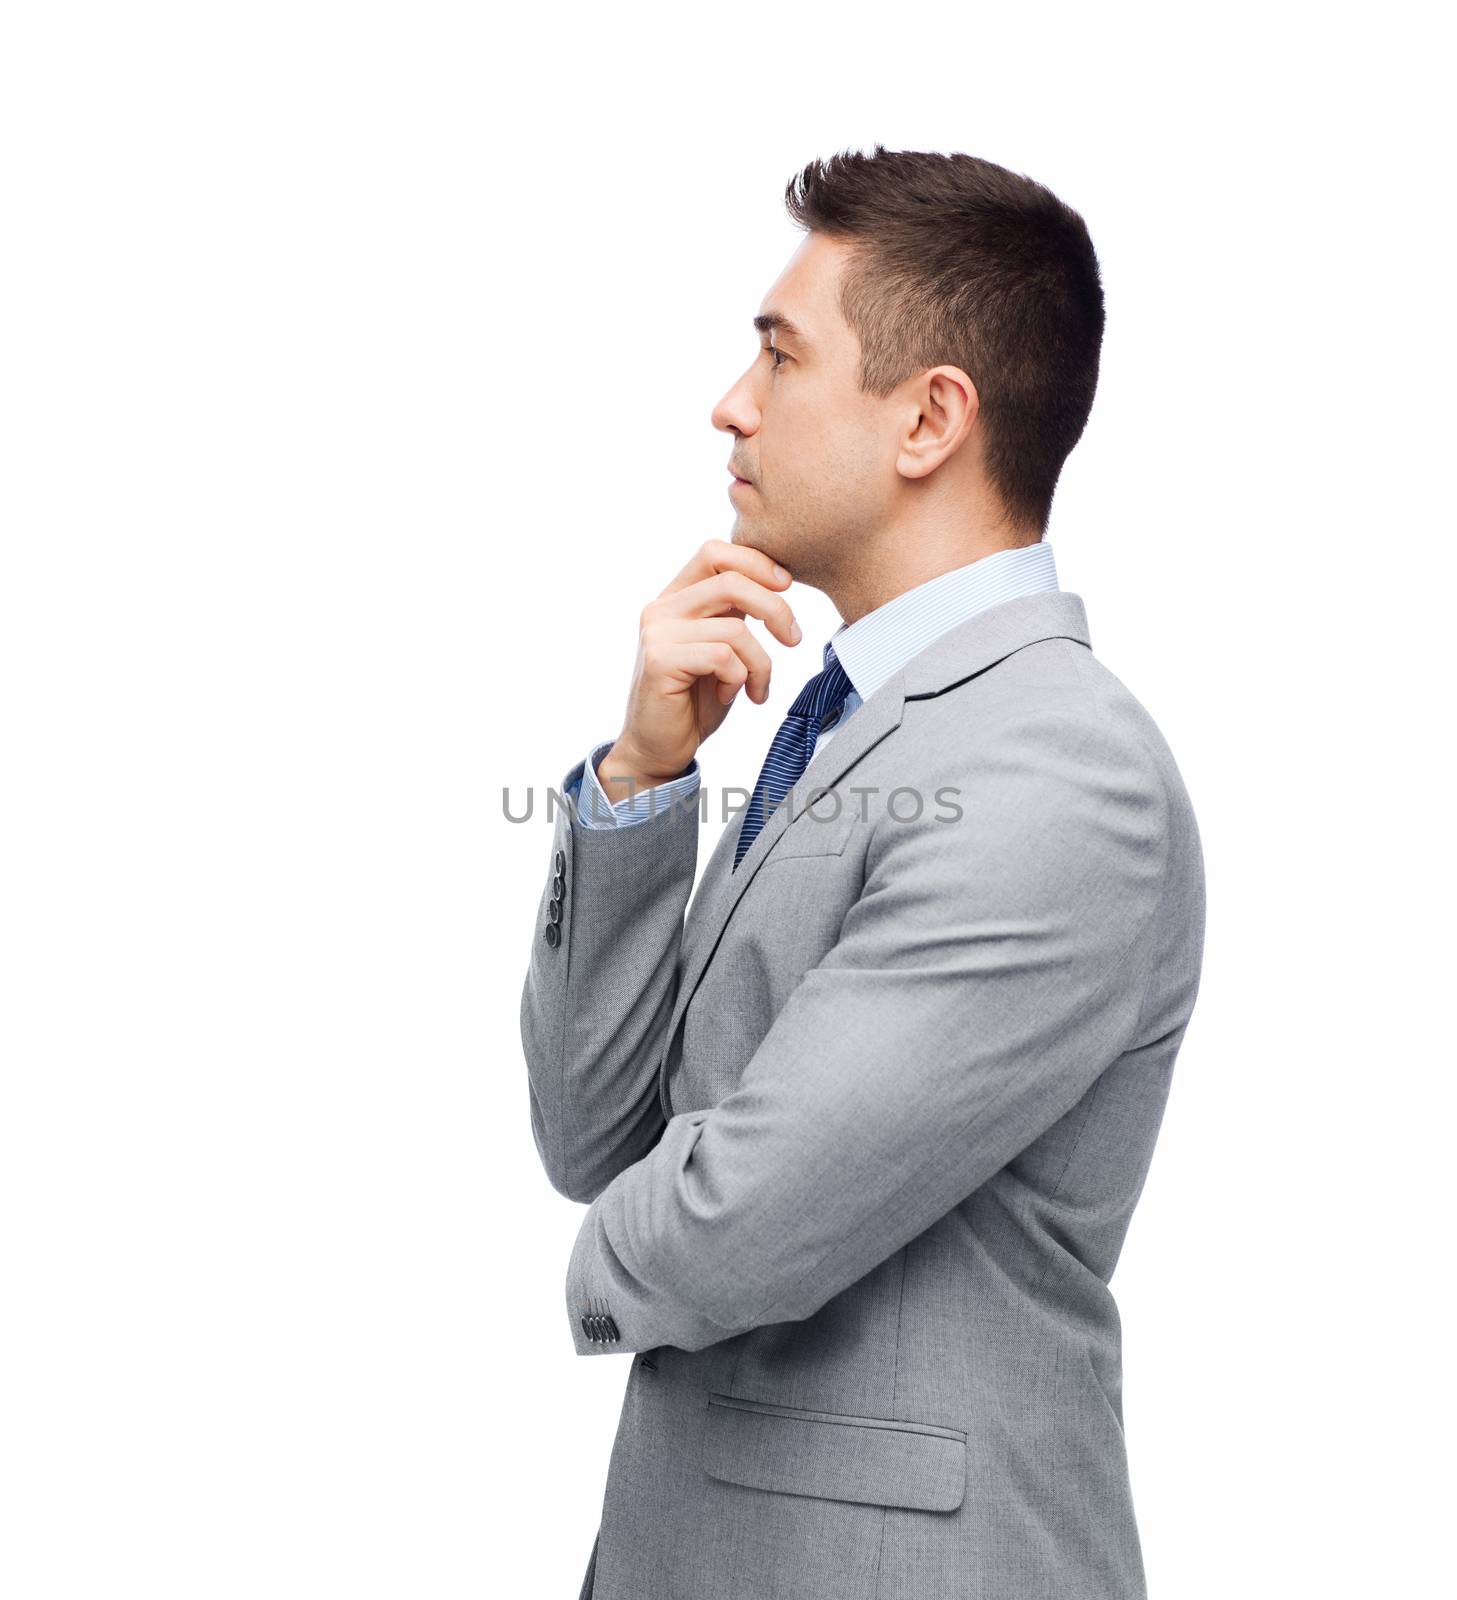 business, people and office concept - thinking businessman in suit making decision